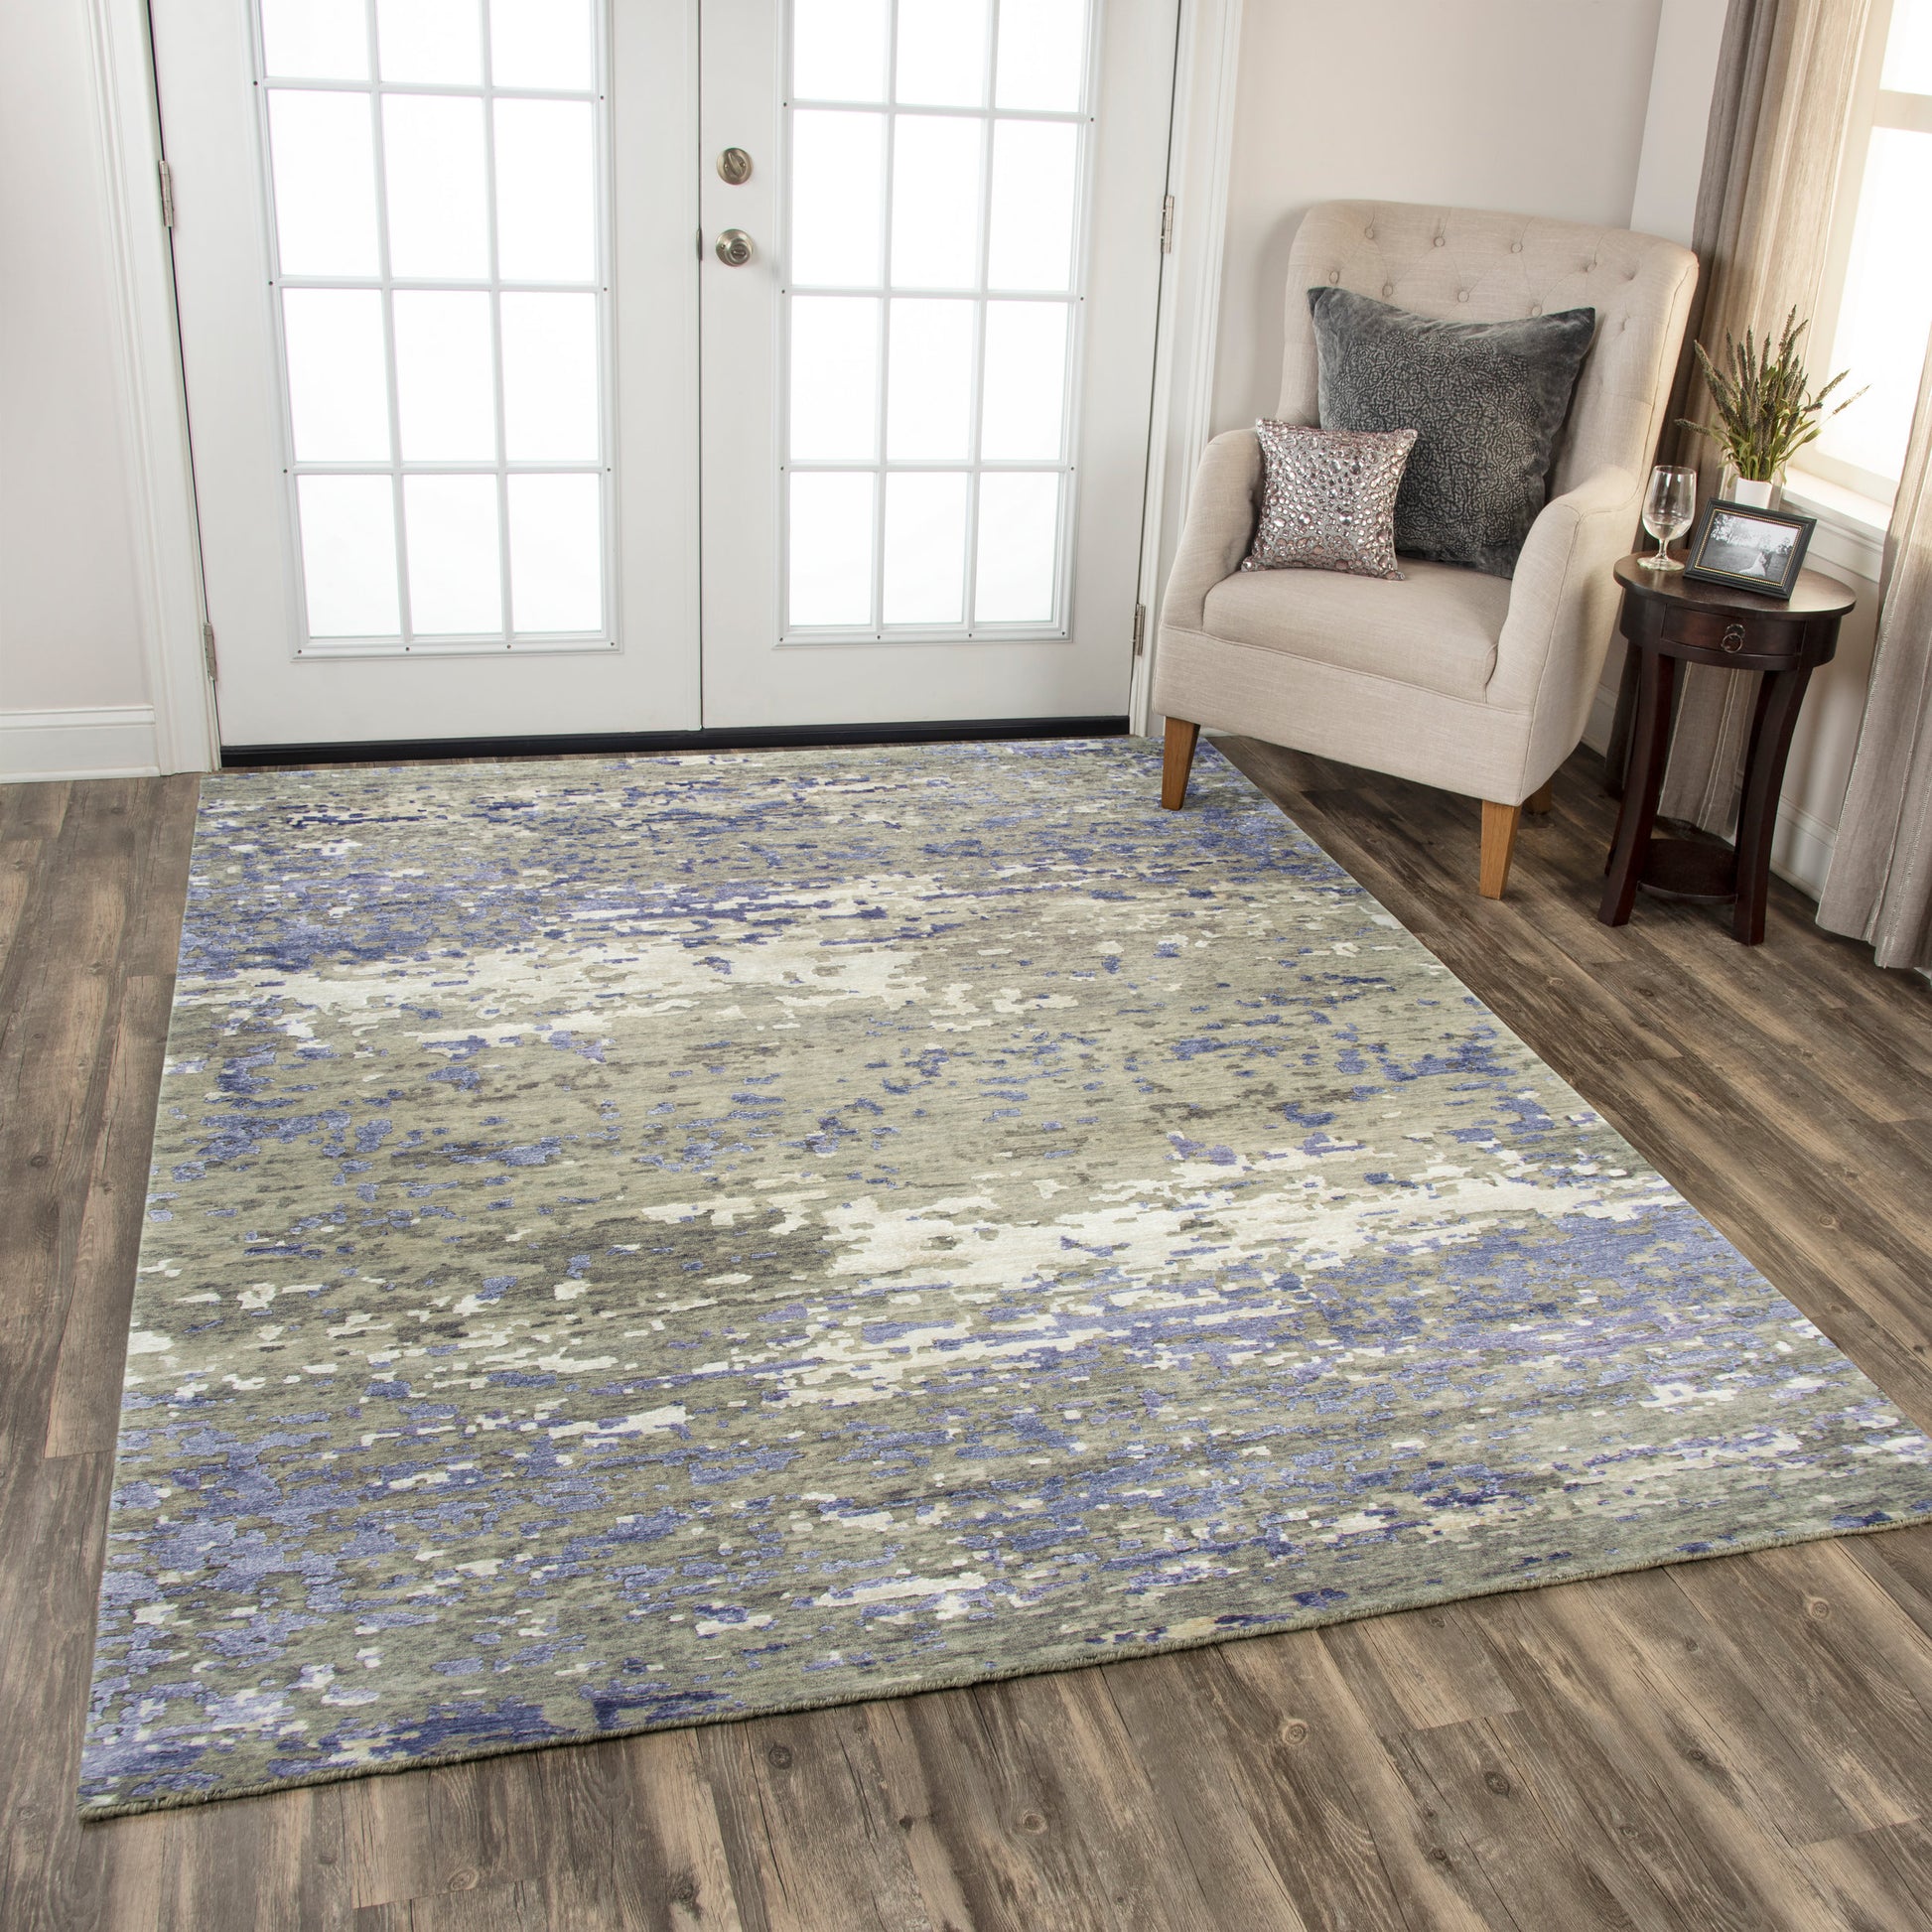 Rizzy Finesse Fin105 Brown/Beige Area Rug